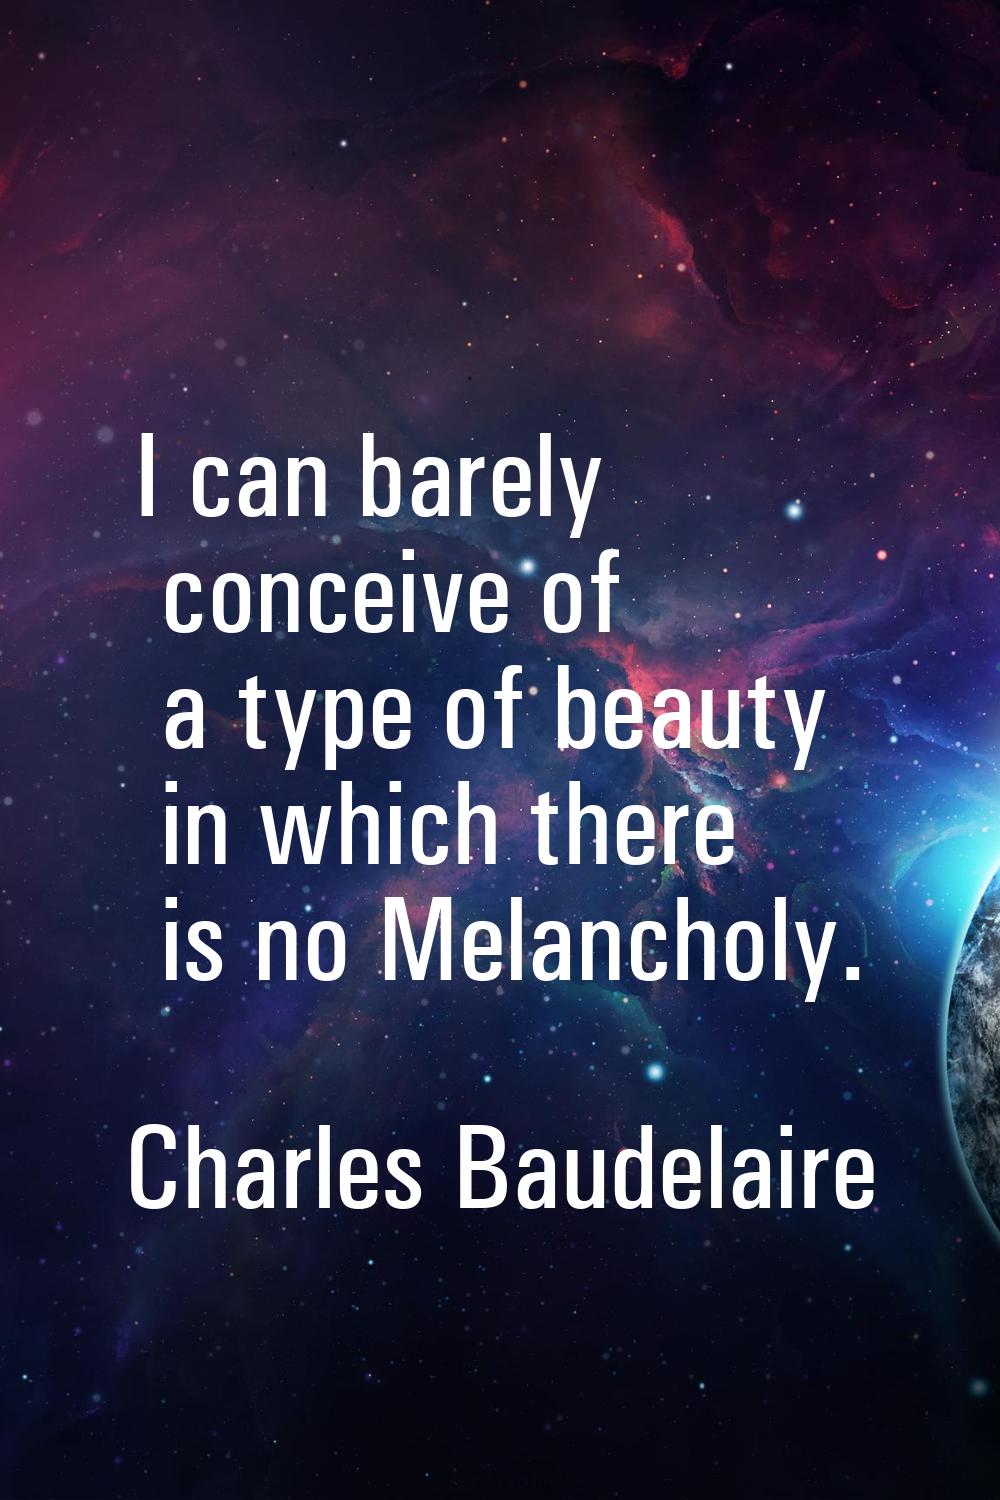 I can barely conceive of a type of beauty in which there is no Melancholy.